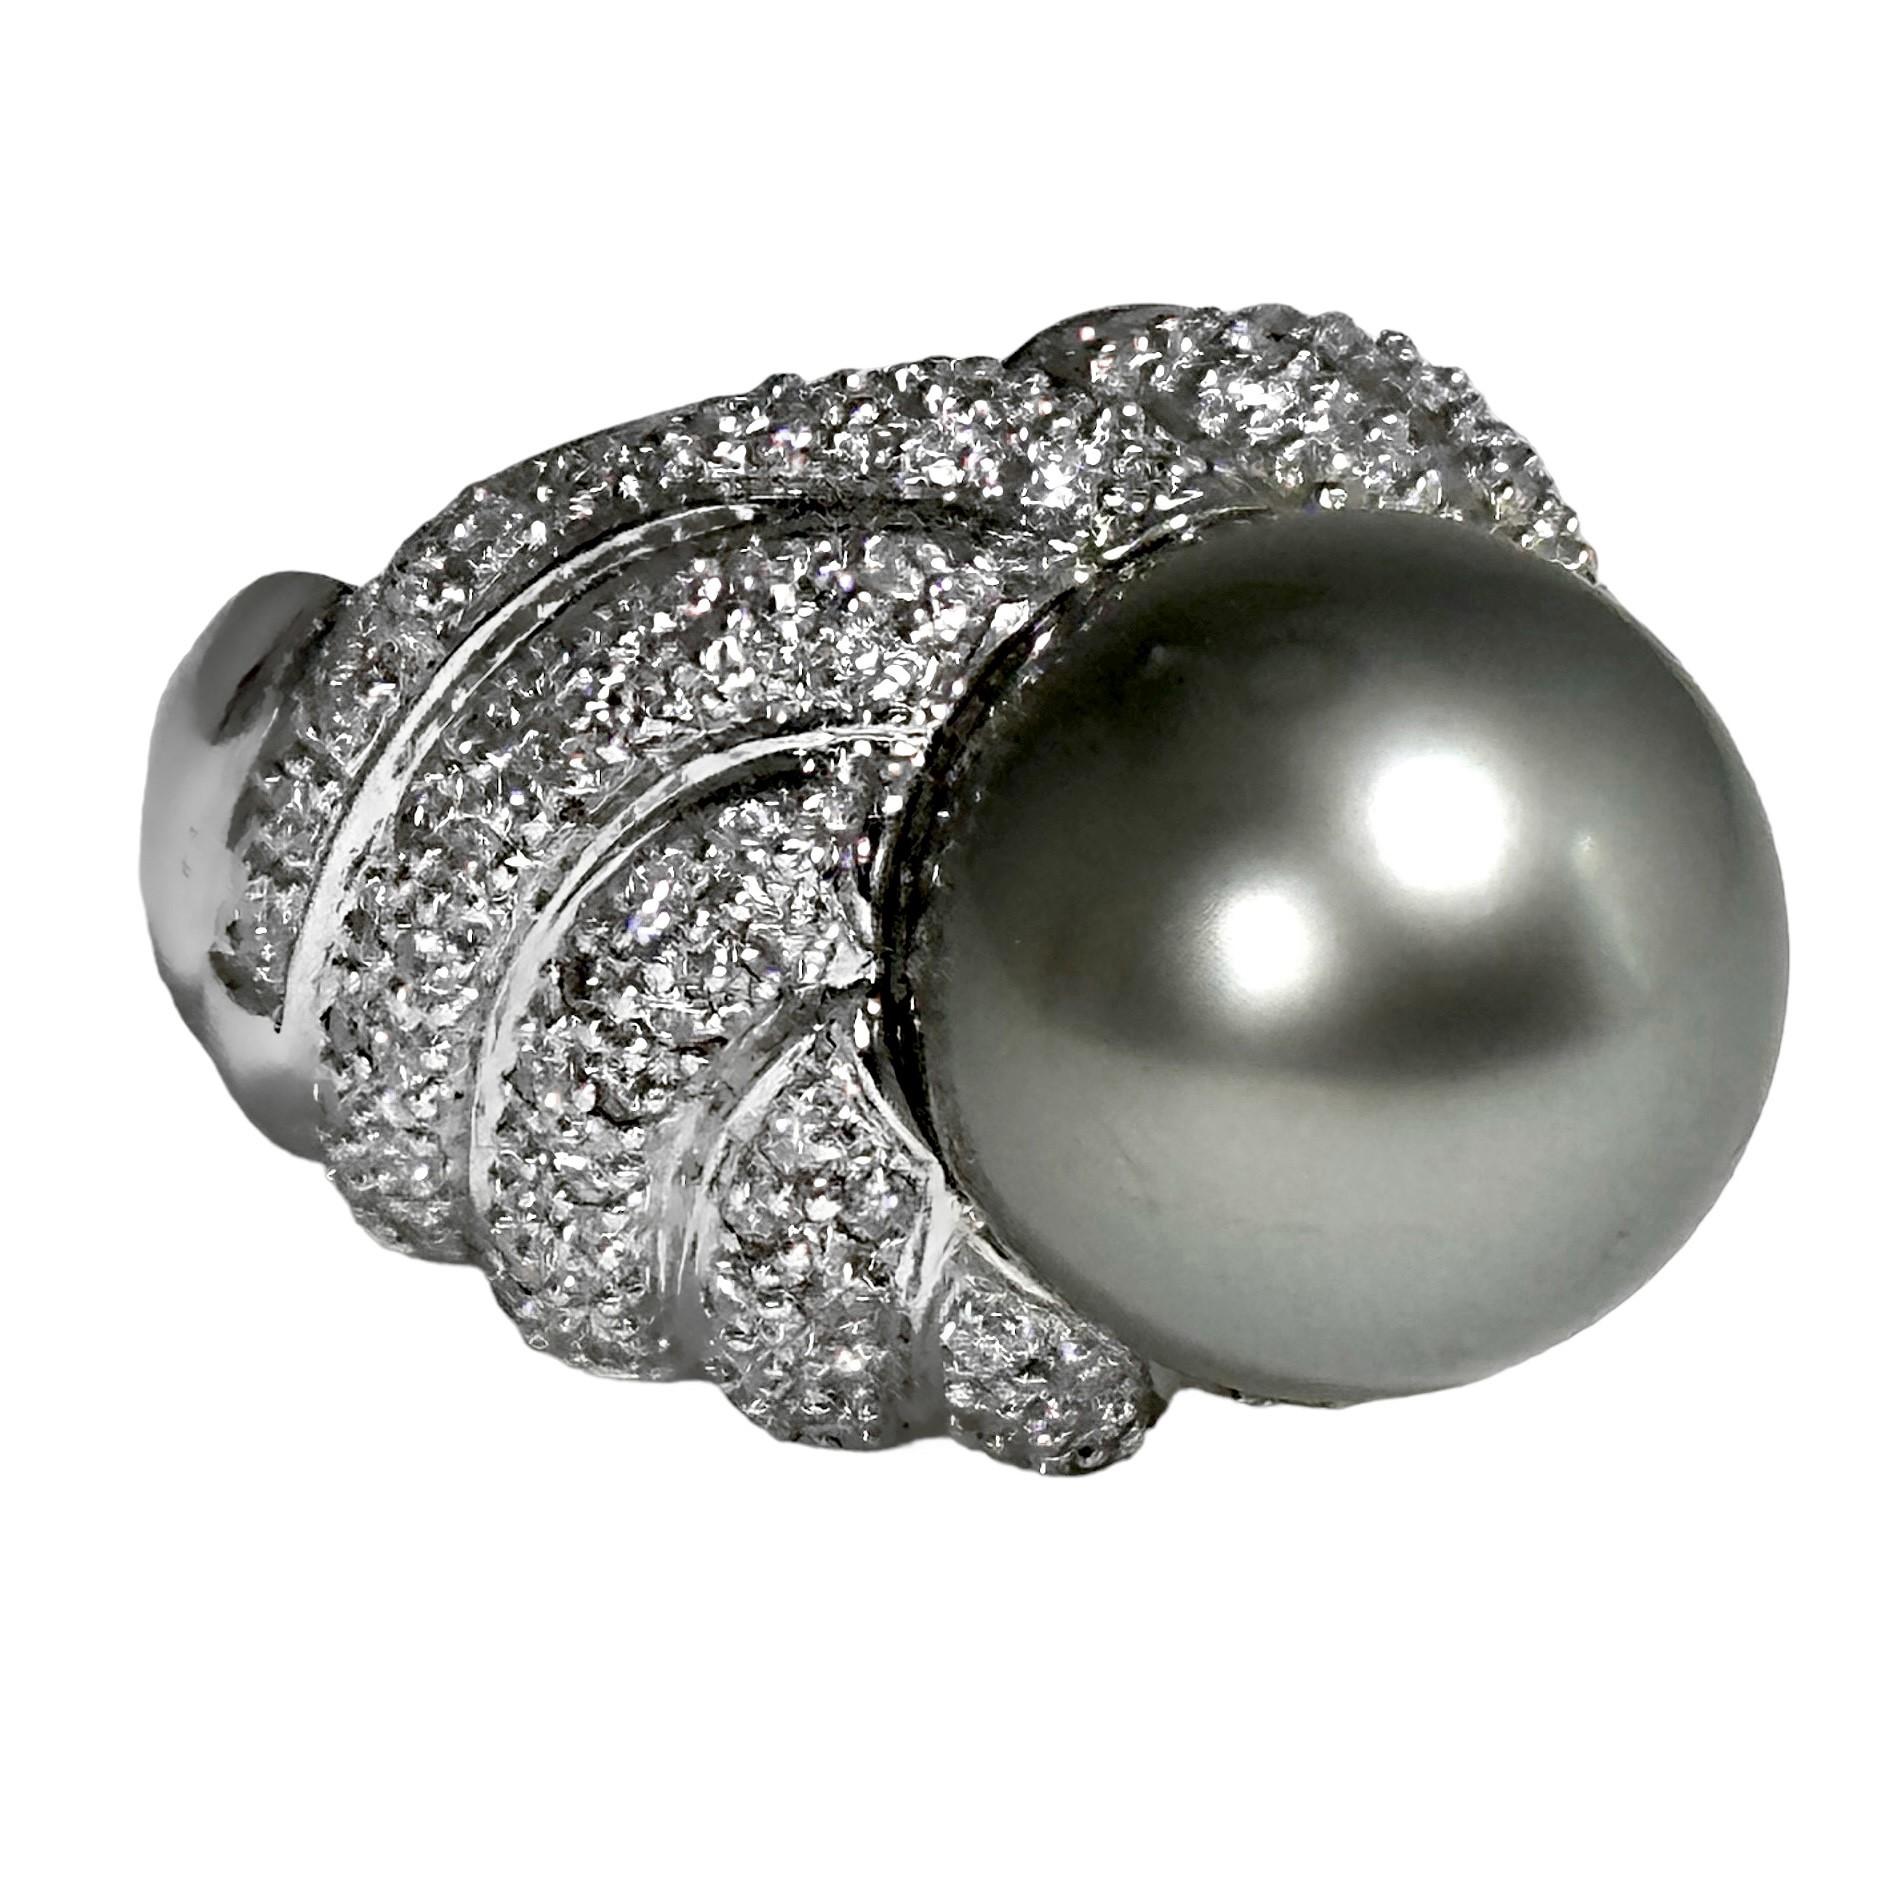 This bold and lovely 18k white gold vintage ladies cocktail ring features one central cultured 13.5mm diameter Tahitian cultured grey pearl, topping off eleven bombe swirls set with over 135 brilliant cut diamonds, having a total approximate weight